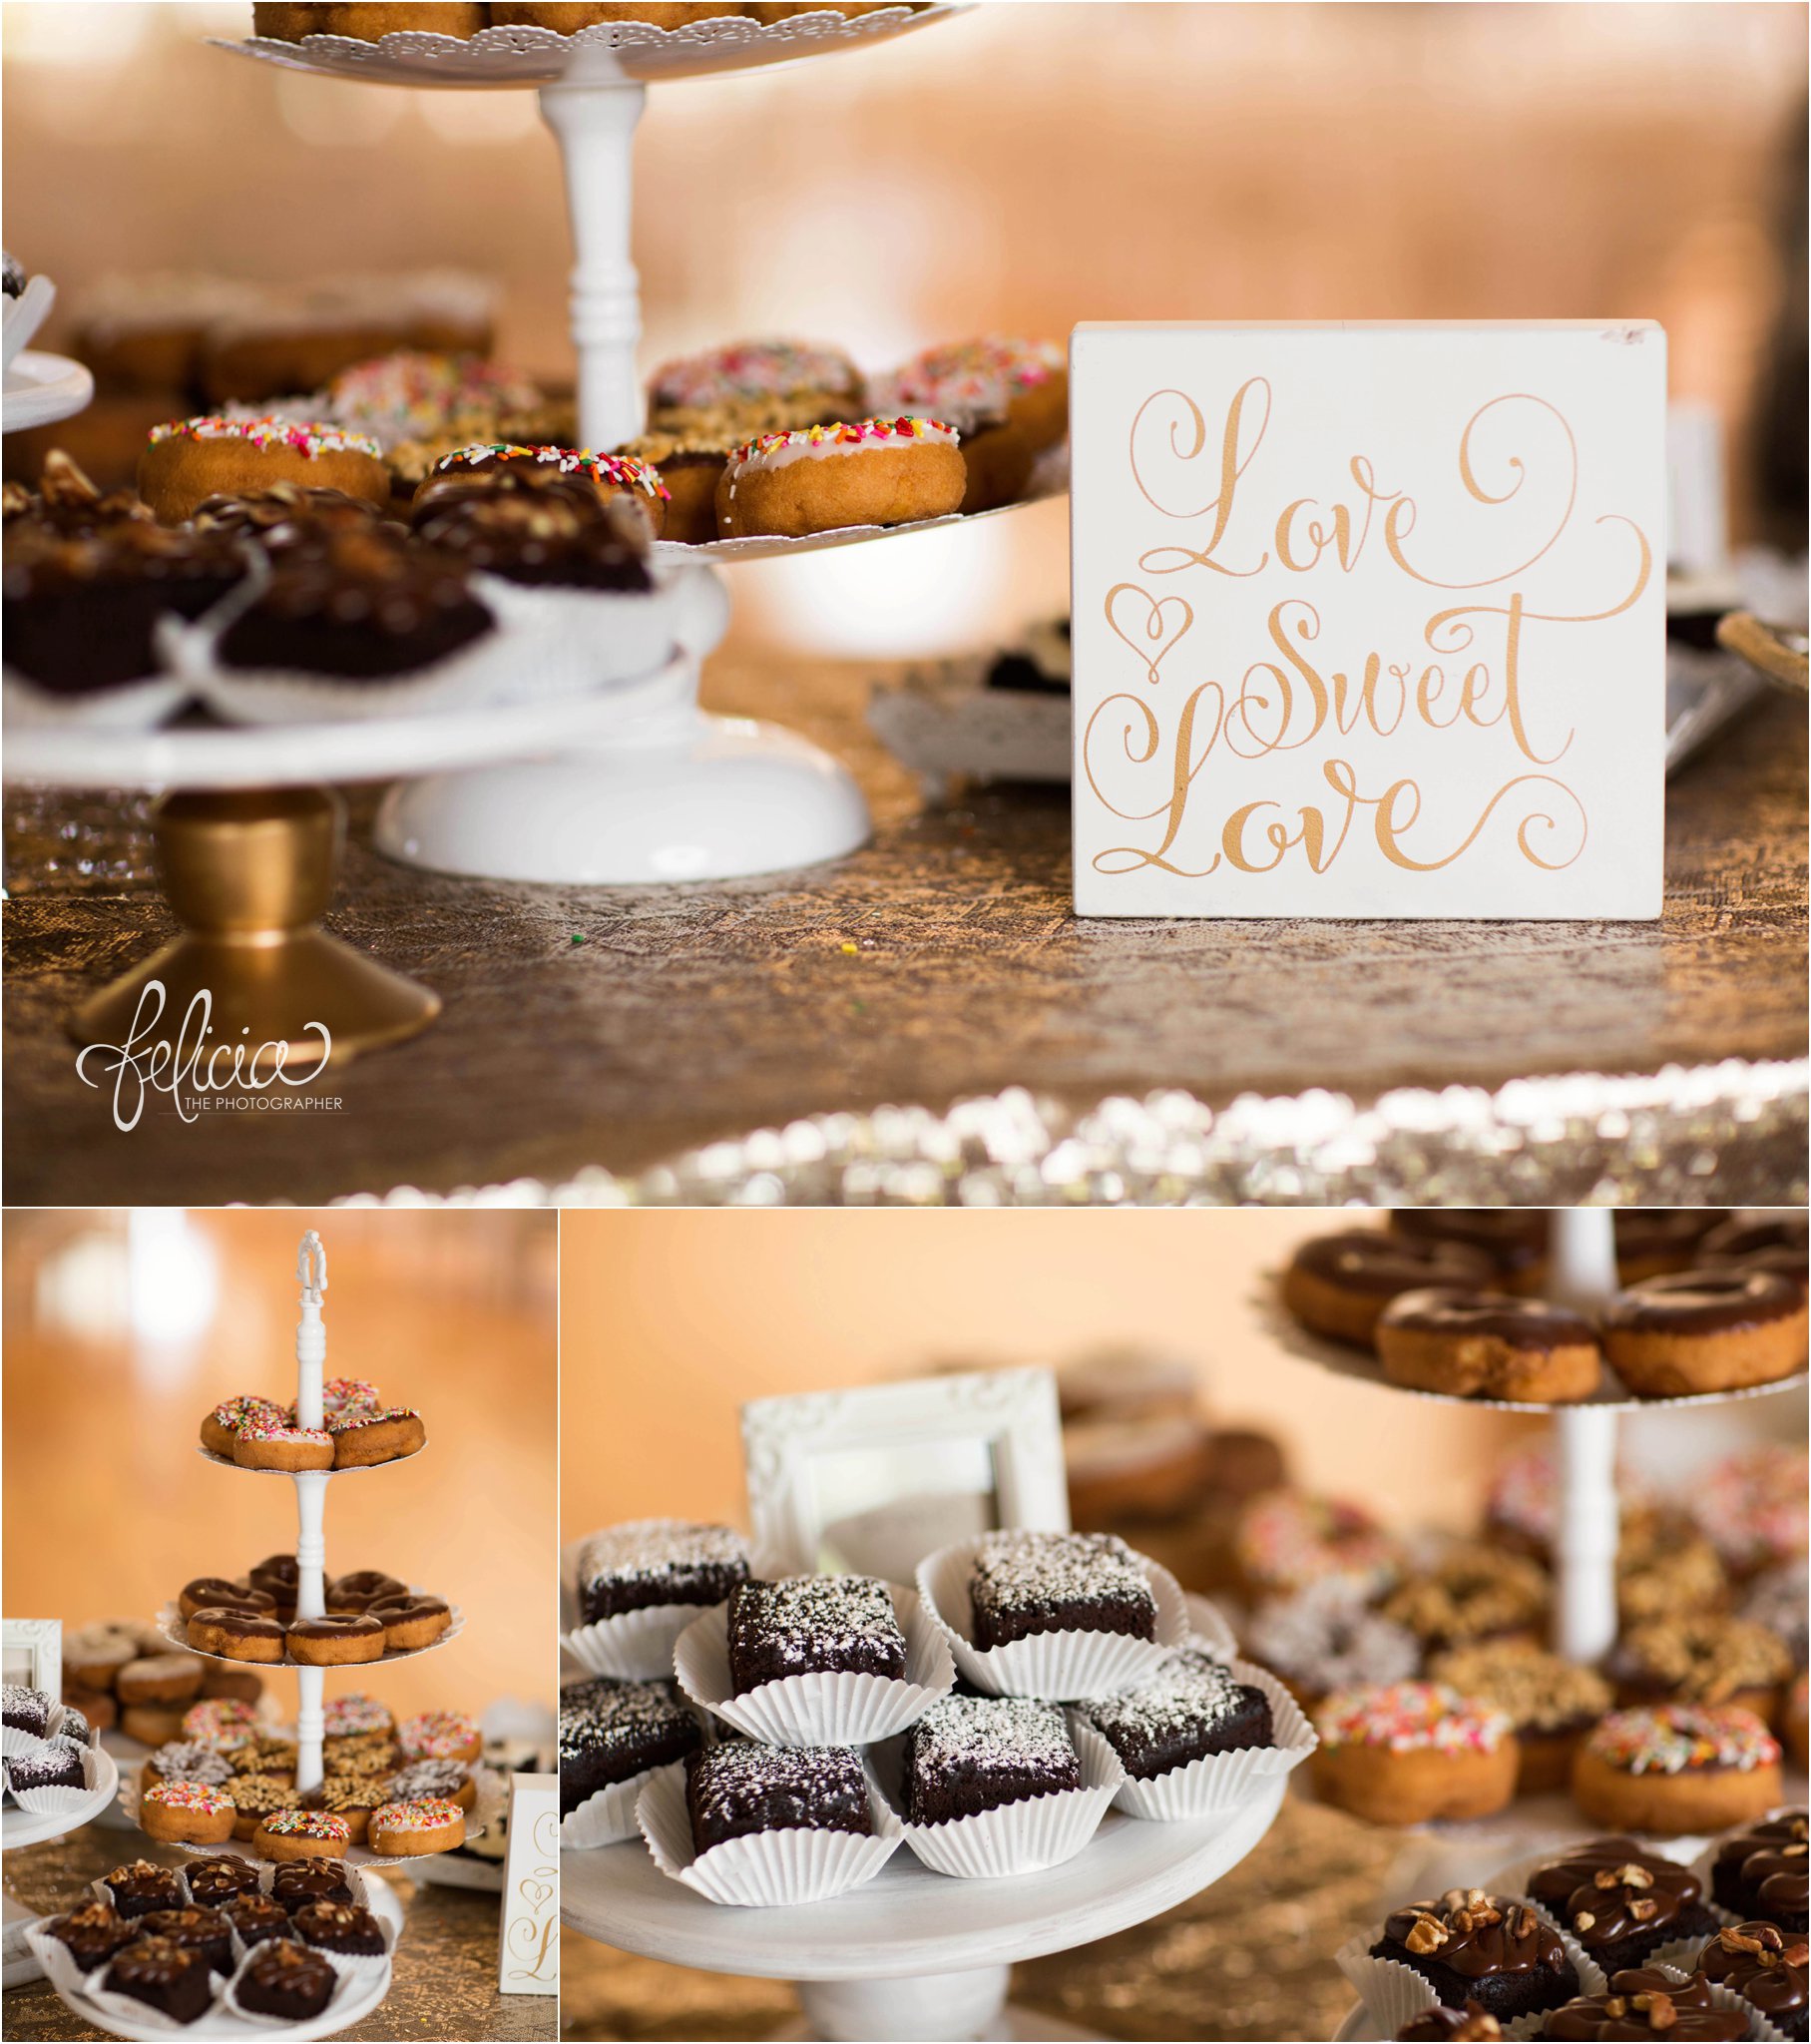 The Hawthorne House | Reception Details | Dessert Table | John's Space-Age Donuts | Cosentino's Brownies | Kansas City Wedding | Felicia The Photographer